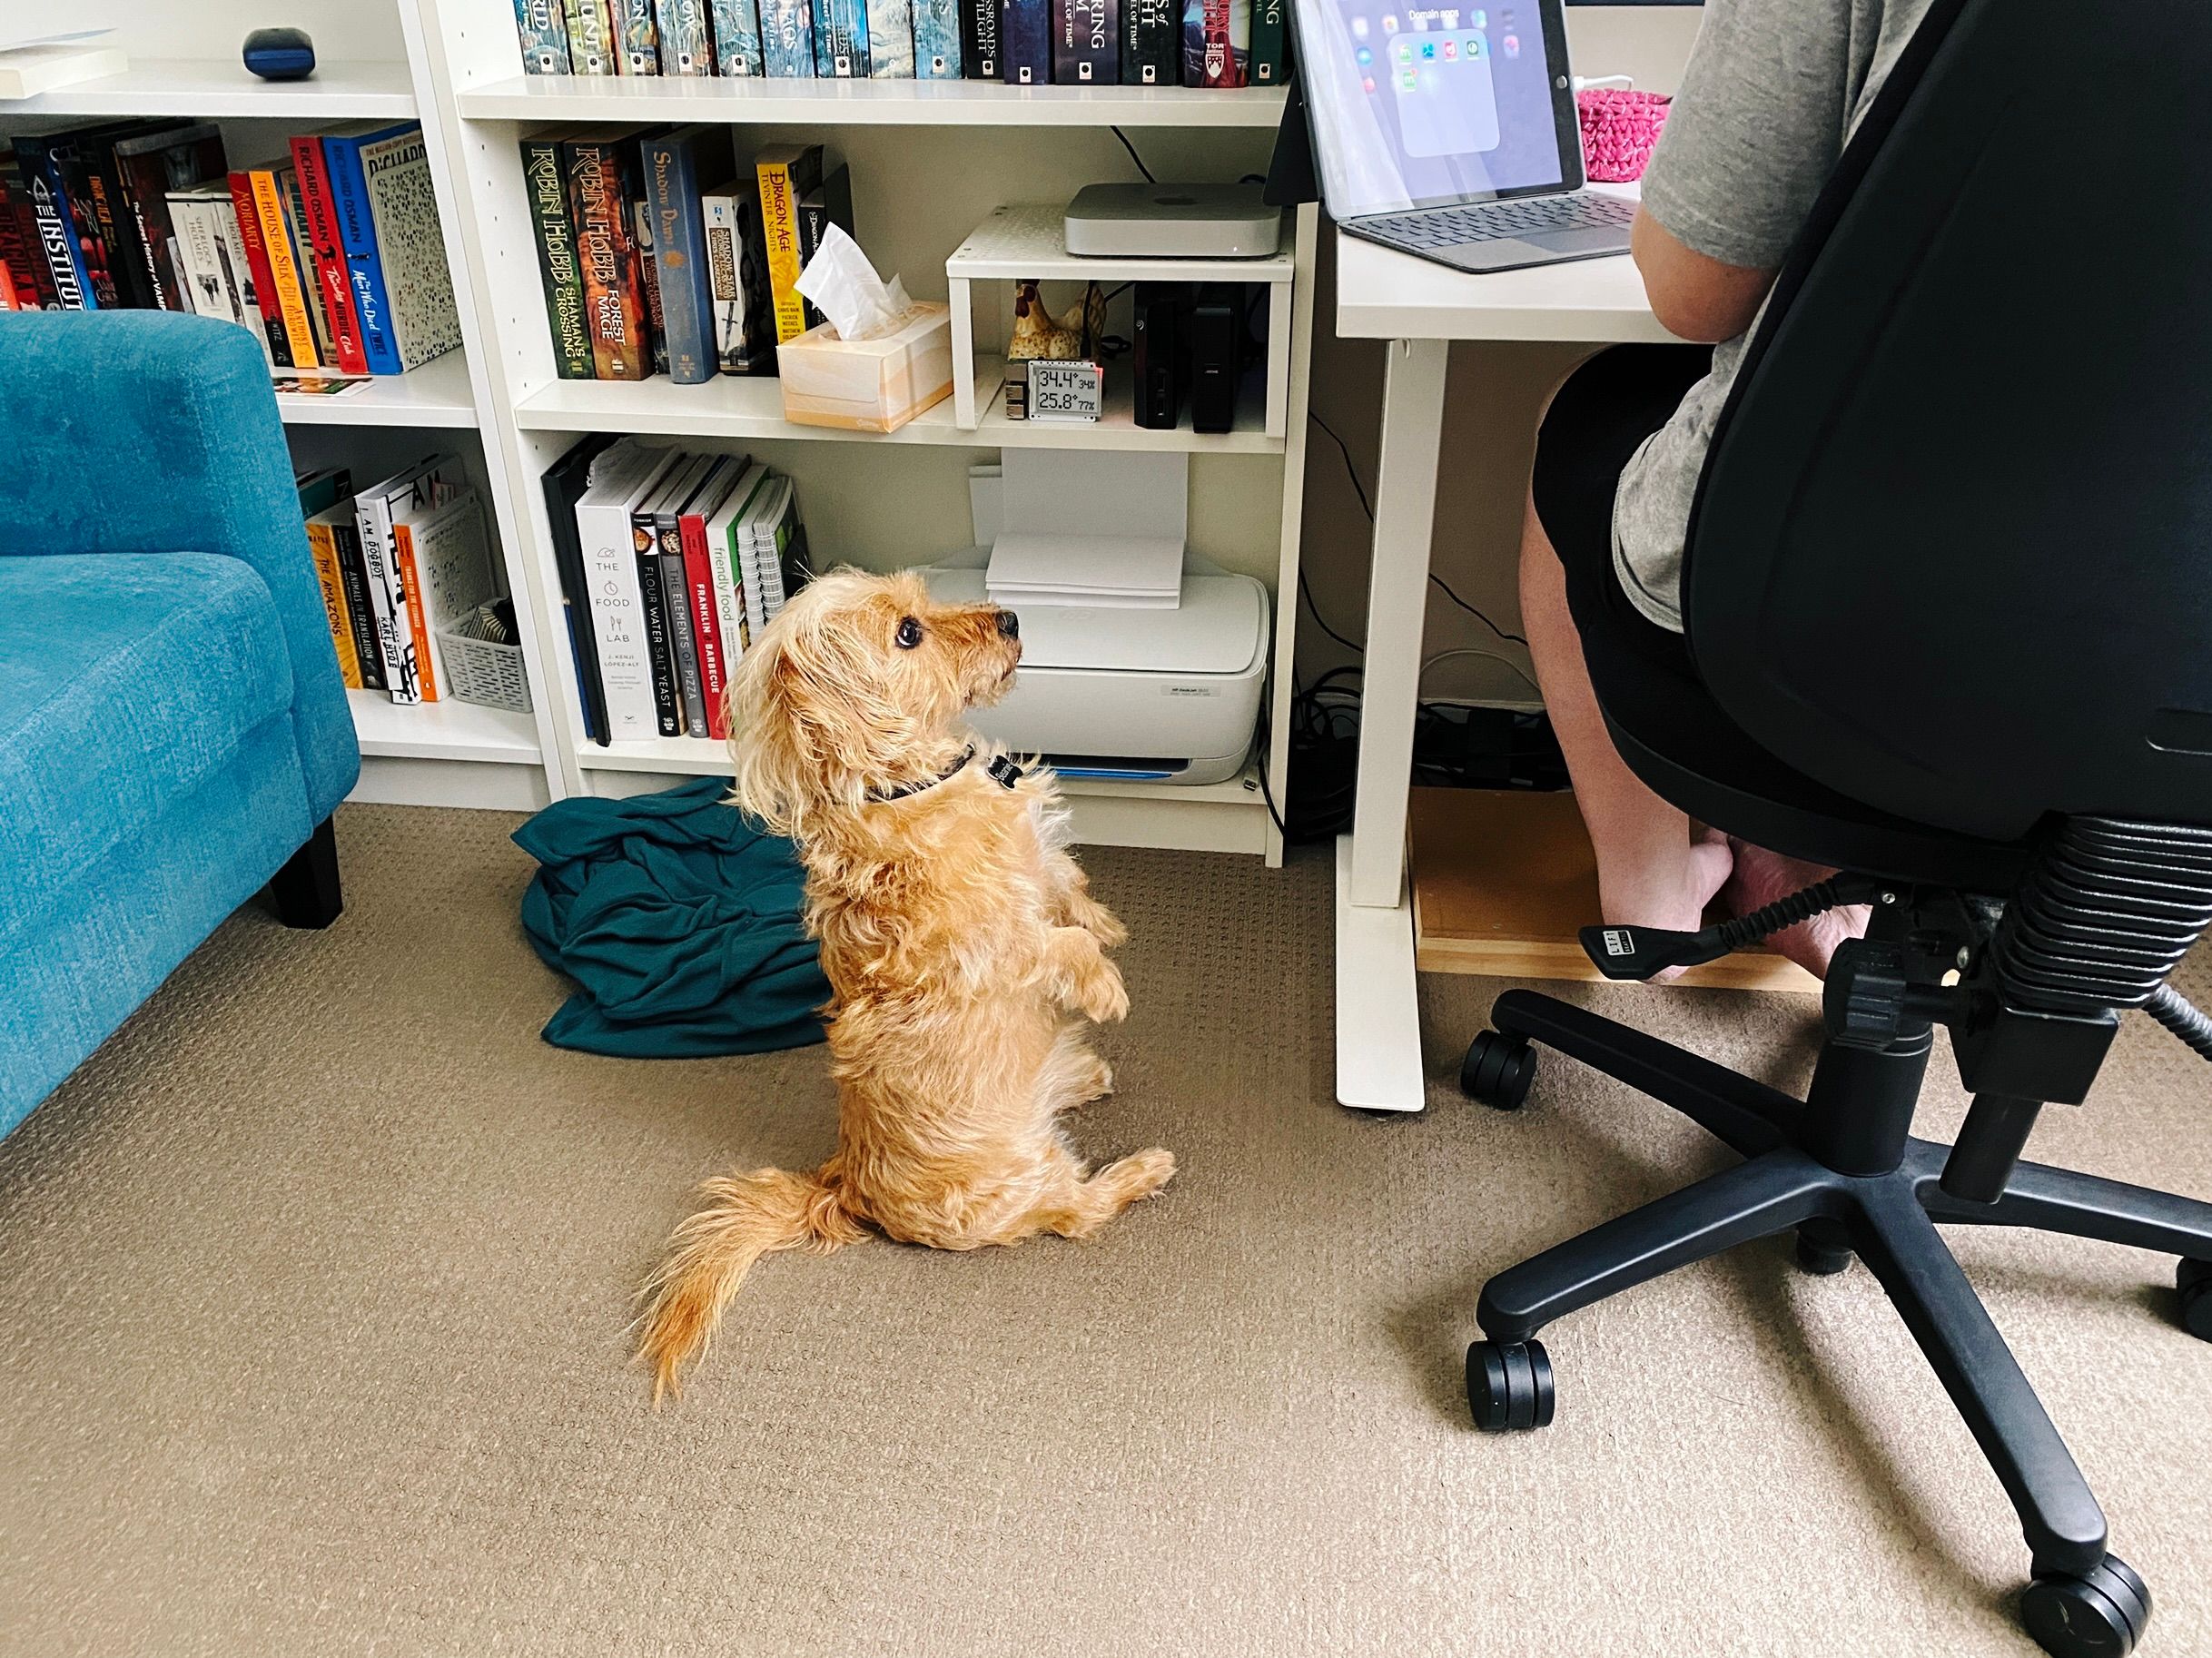 A photo of a small scruffy blonde dog sitting upright on his back legs, staring intently at someone sitting in a desk chair.